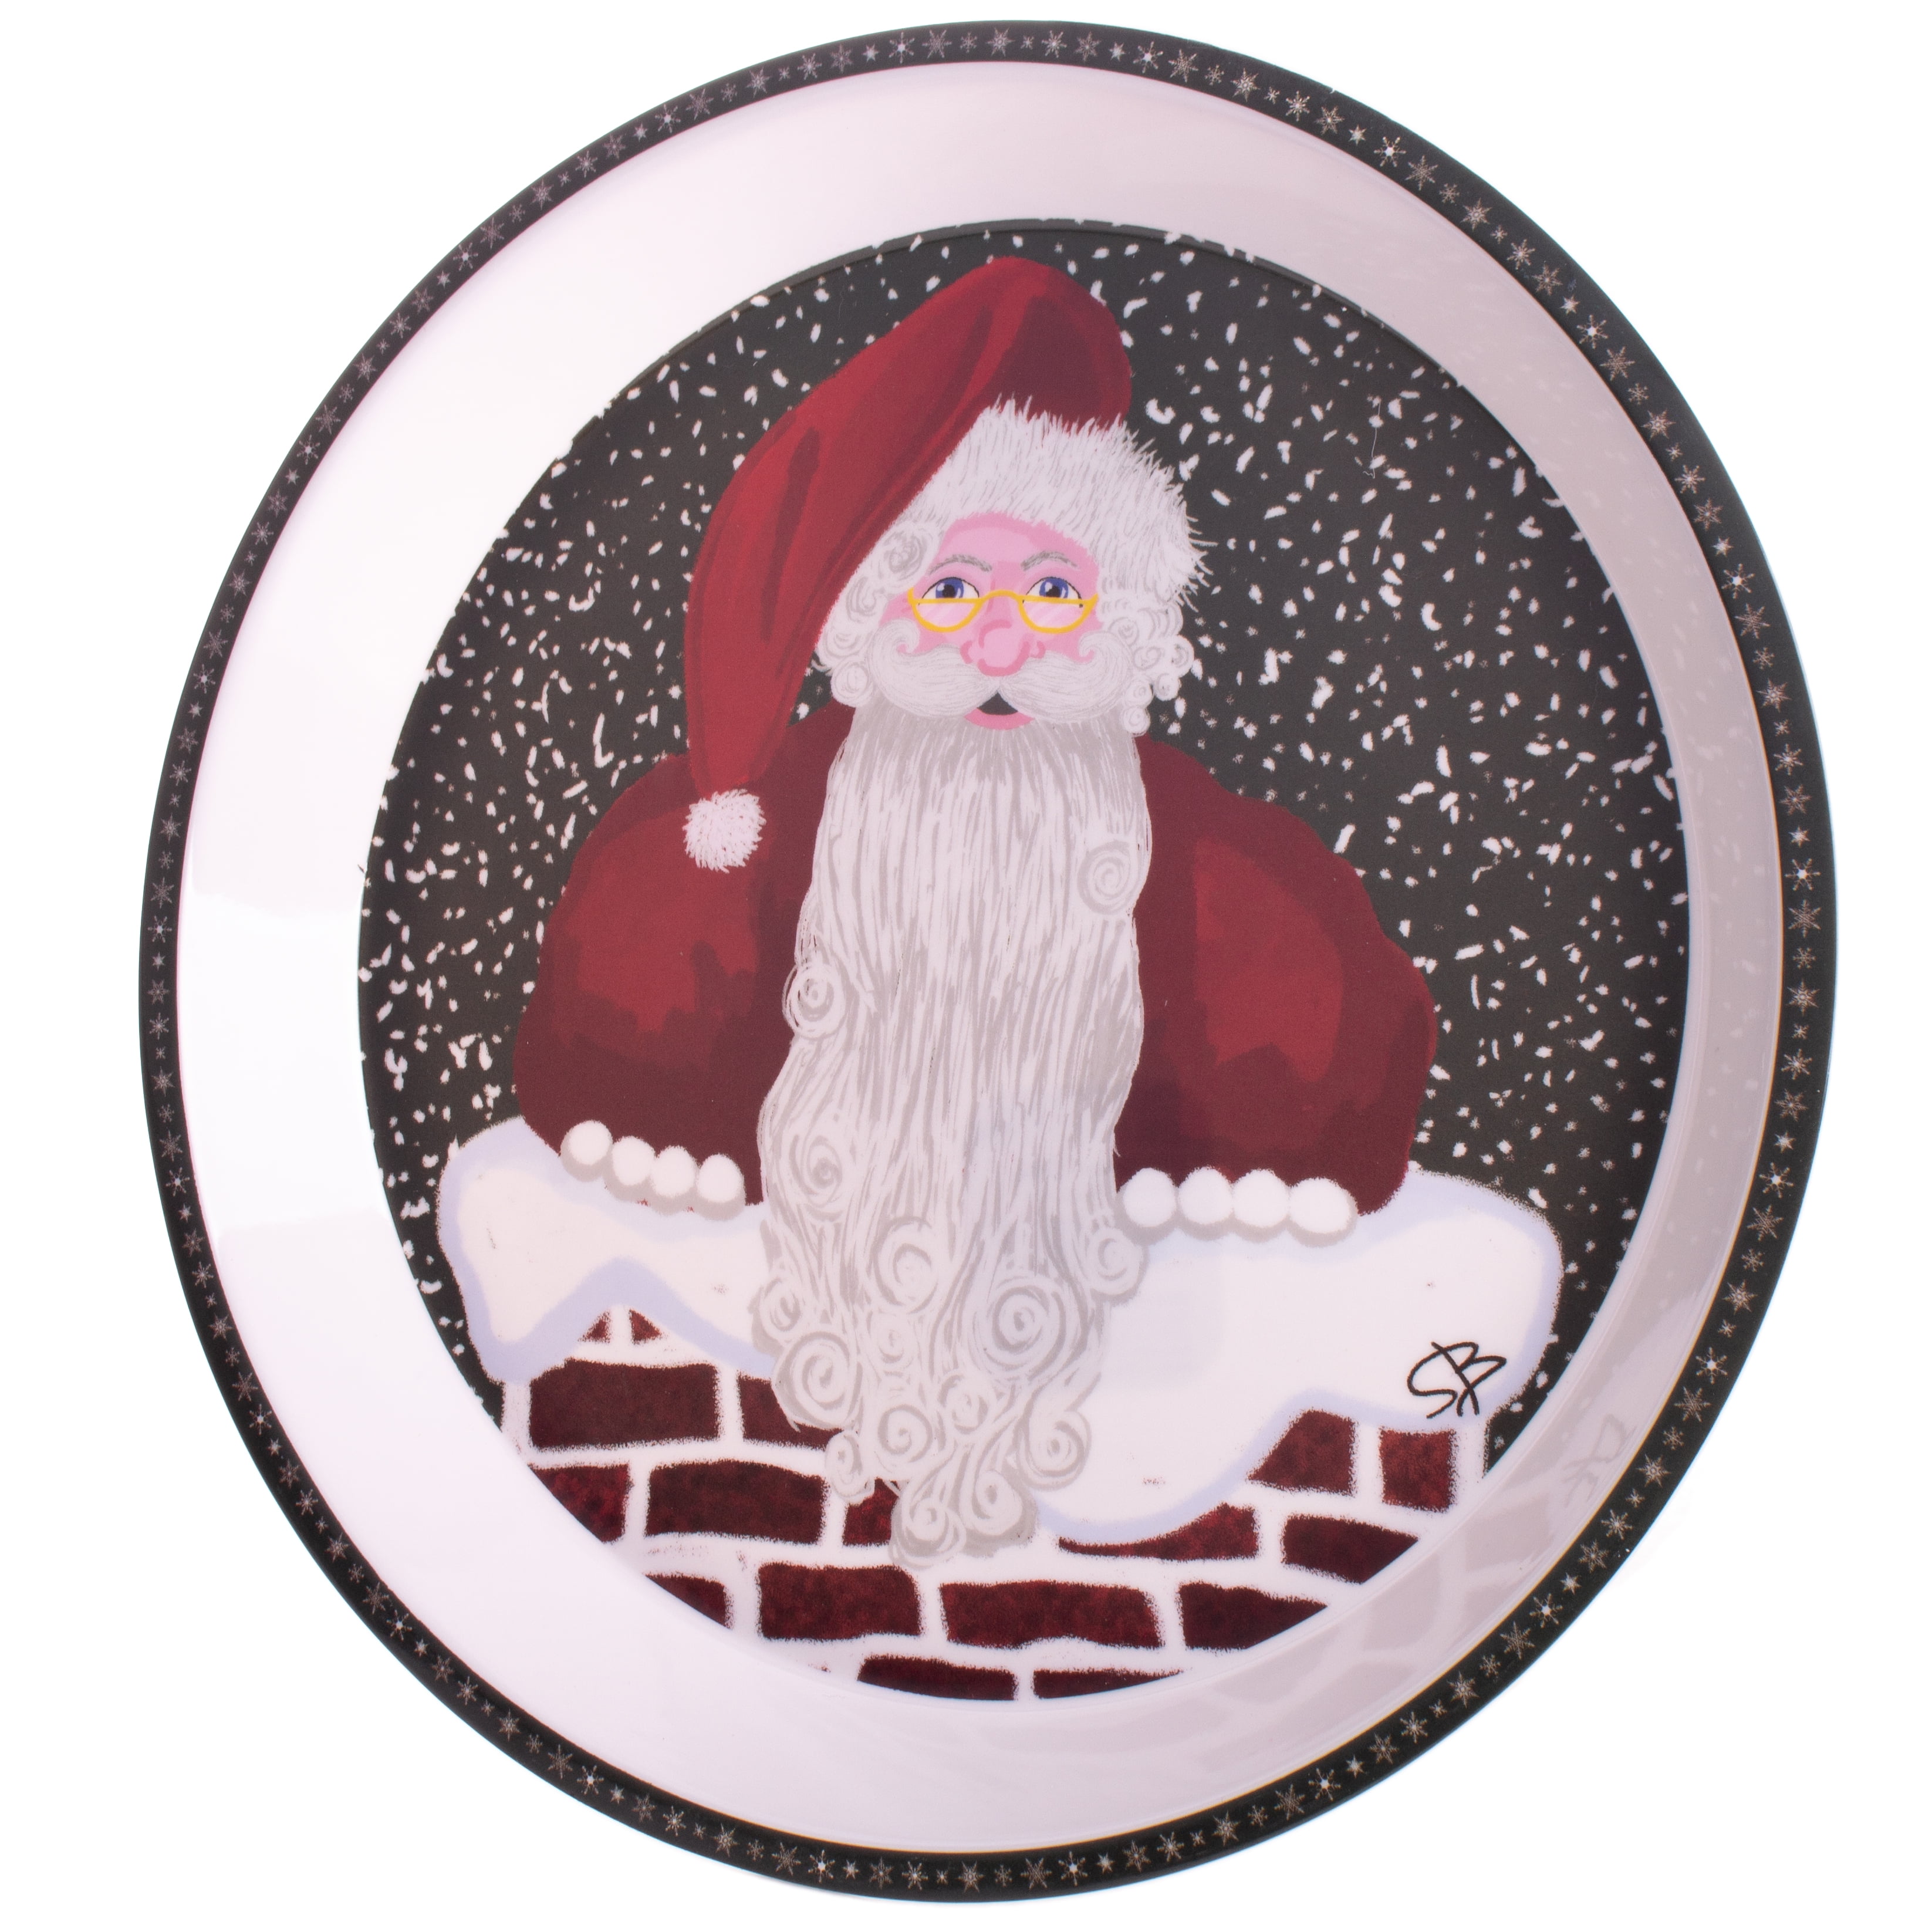 Christmas Village Cookies for Santa ceramic plate white red green holiday 